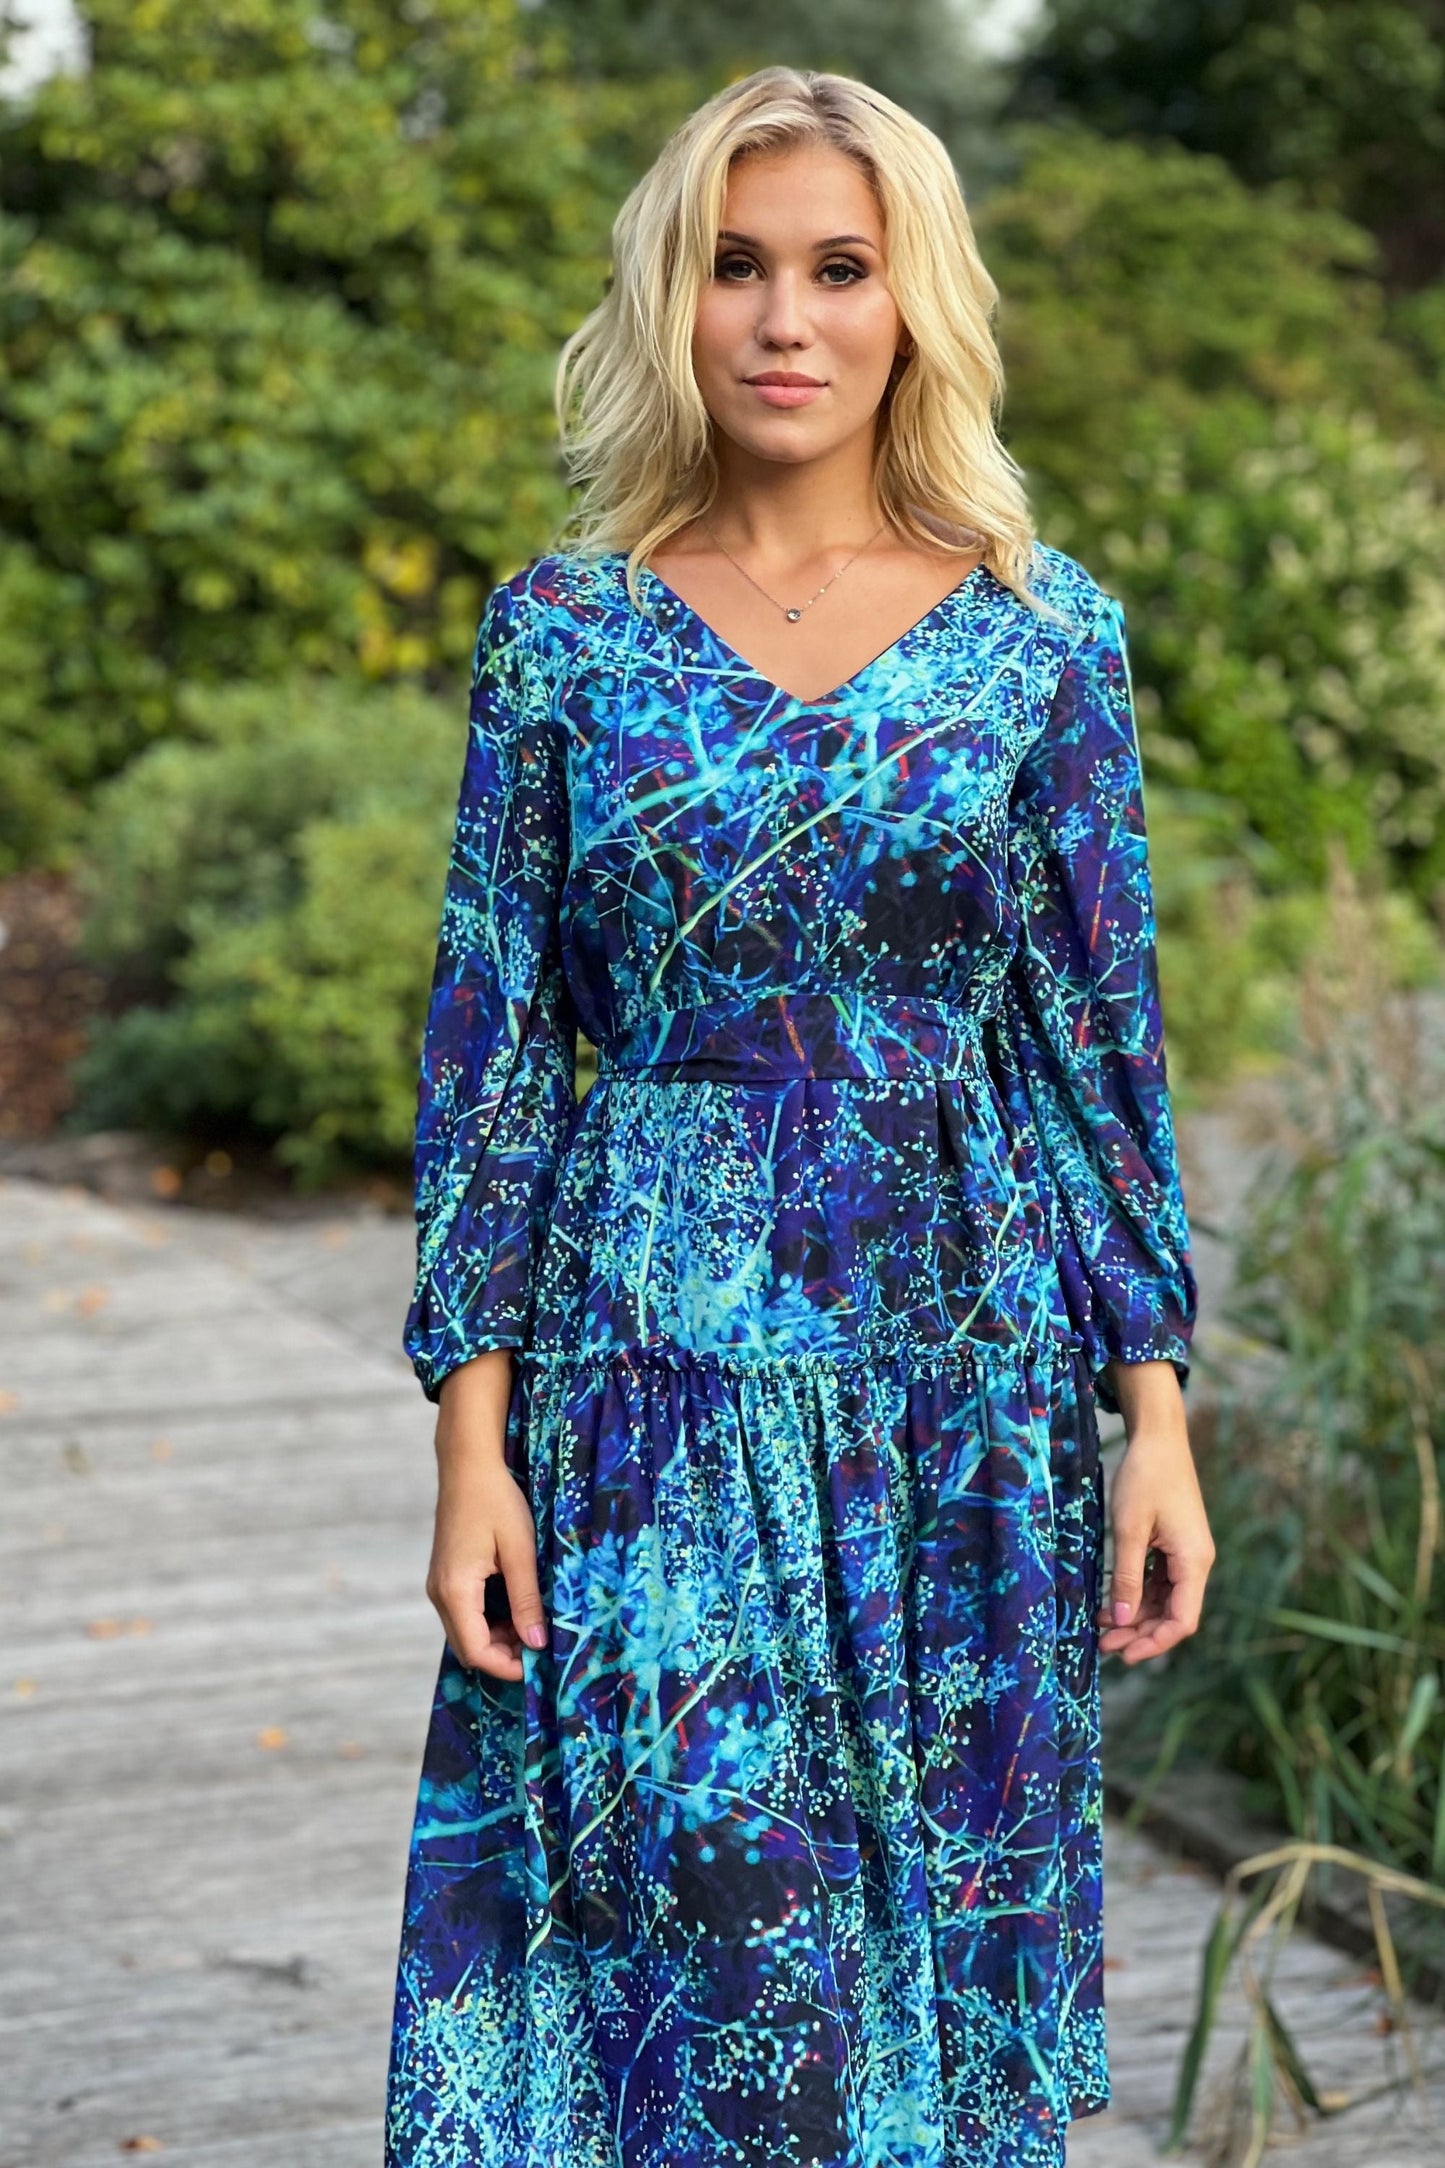 Half-length chiffon dress with turquoise floral print